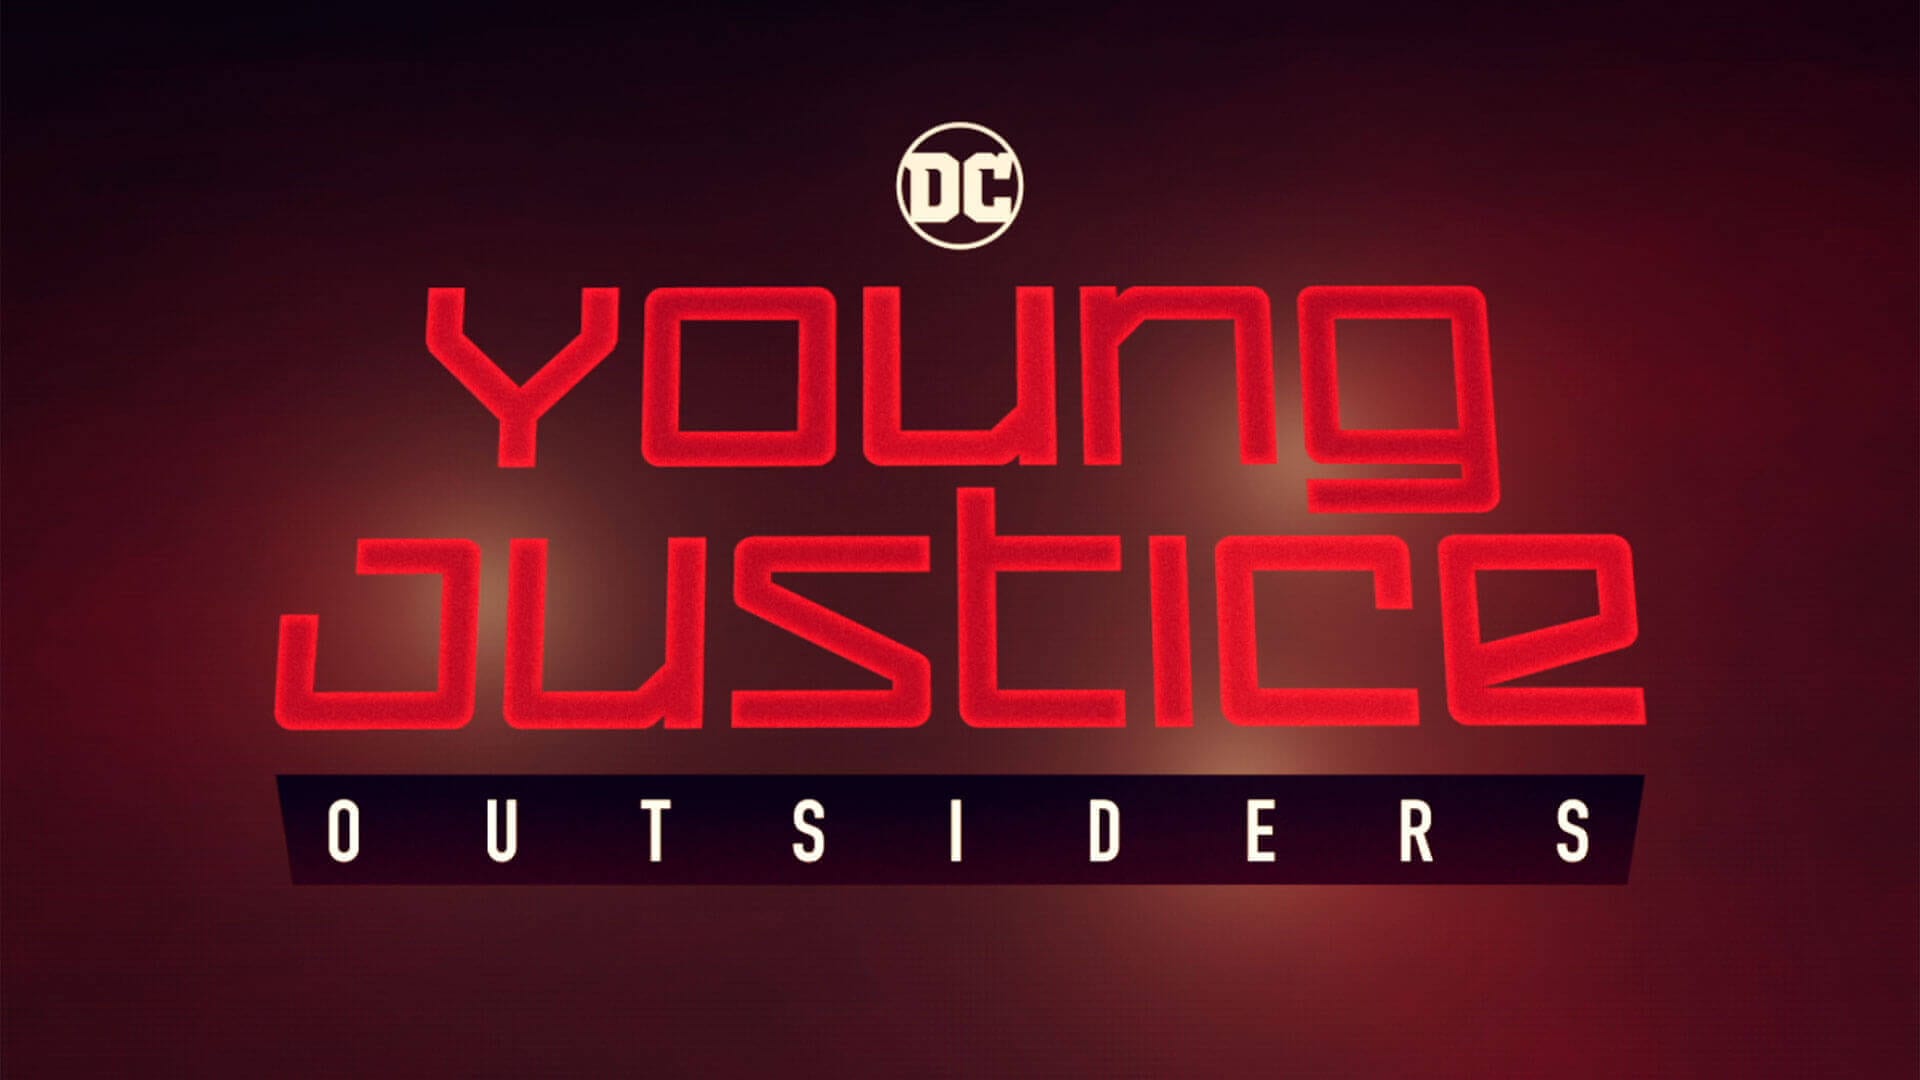 Young Justice, Young Justice: Outsiders